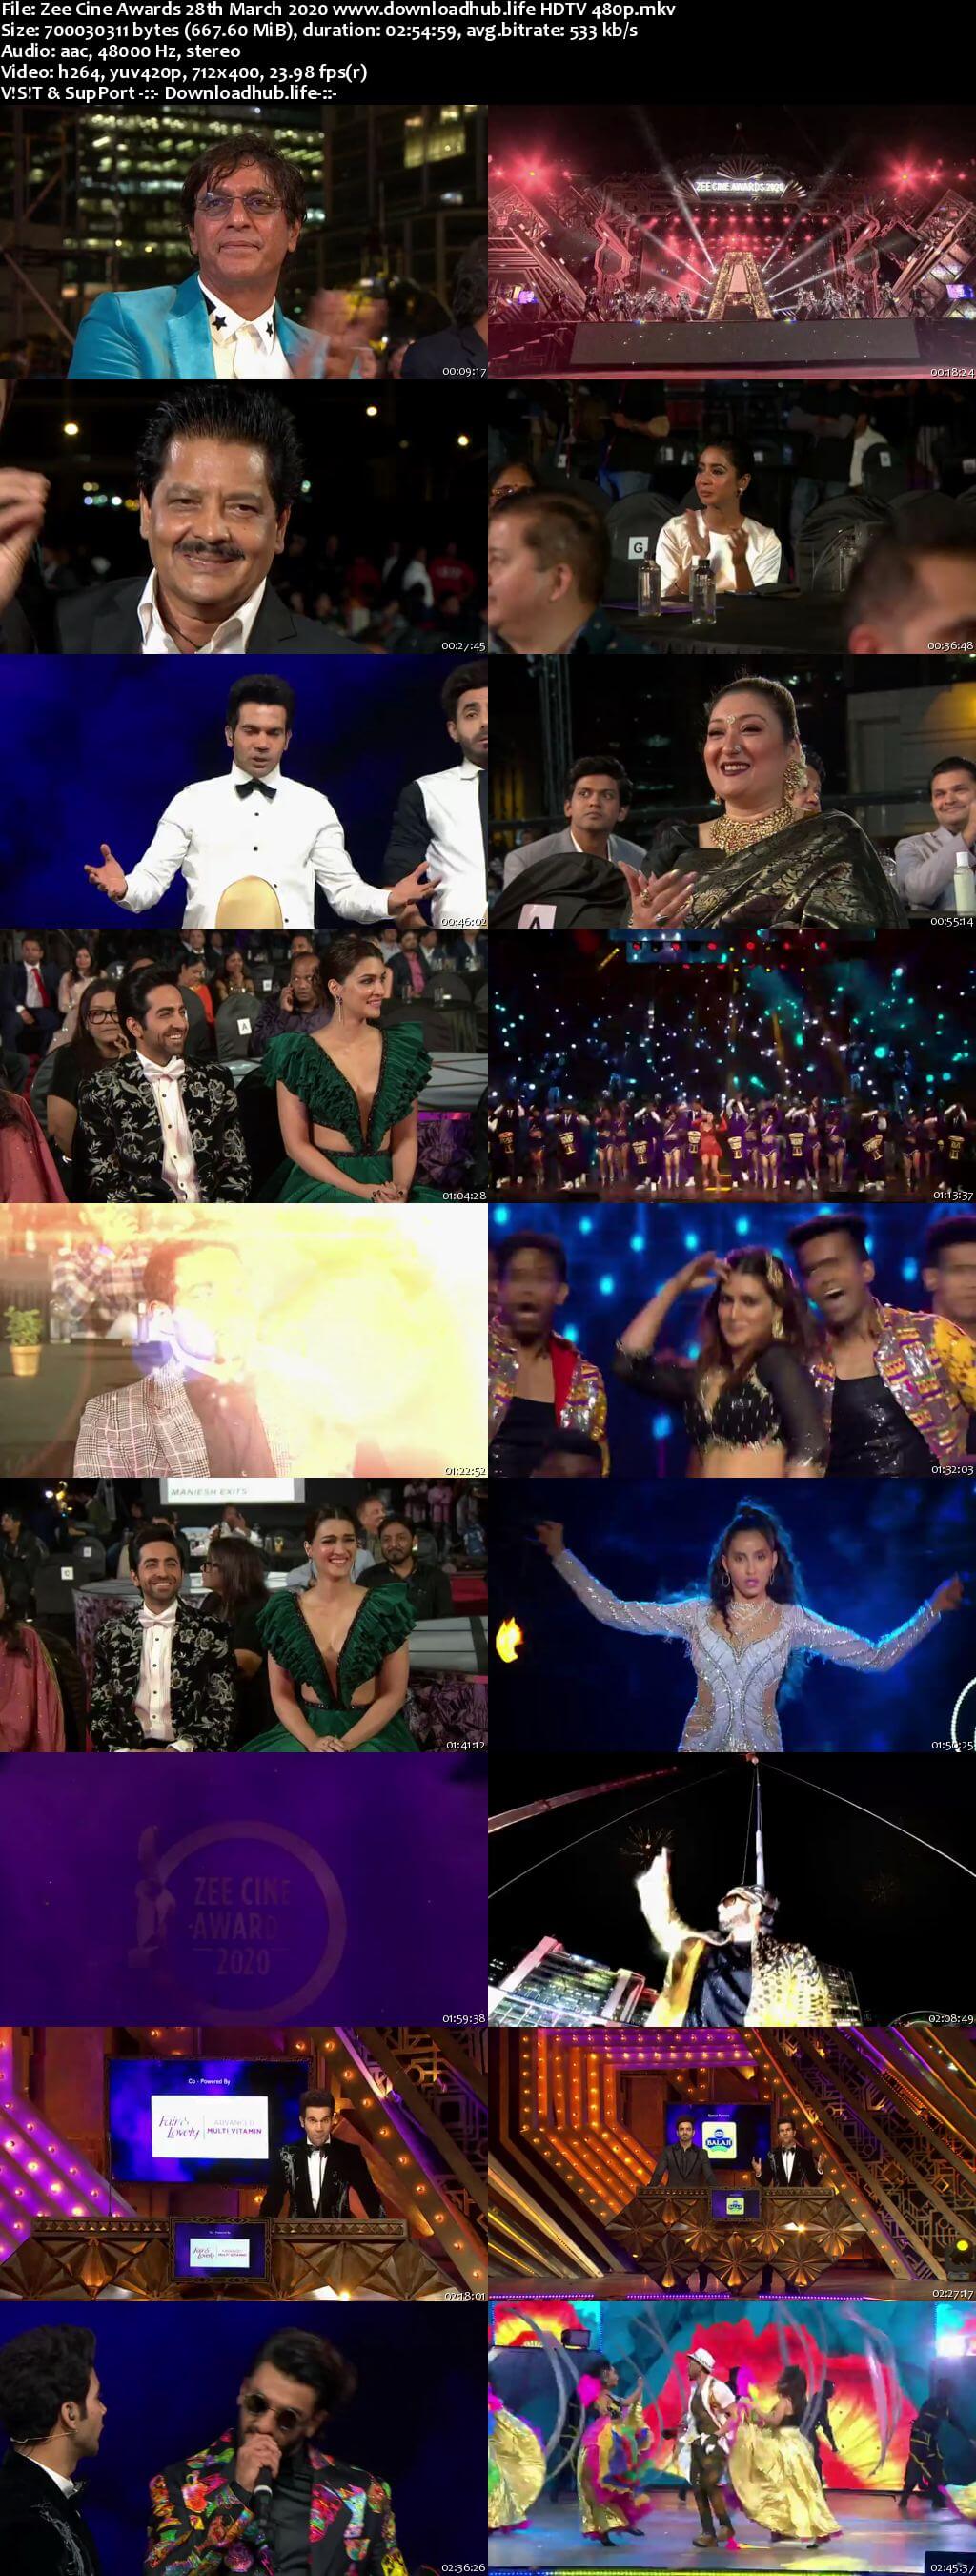 Zee Cine Awards 28th March 2020 650MB HDTV 480p